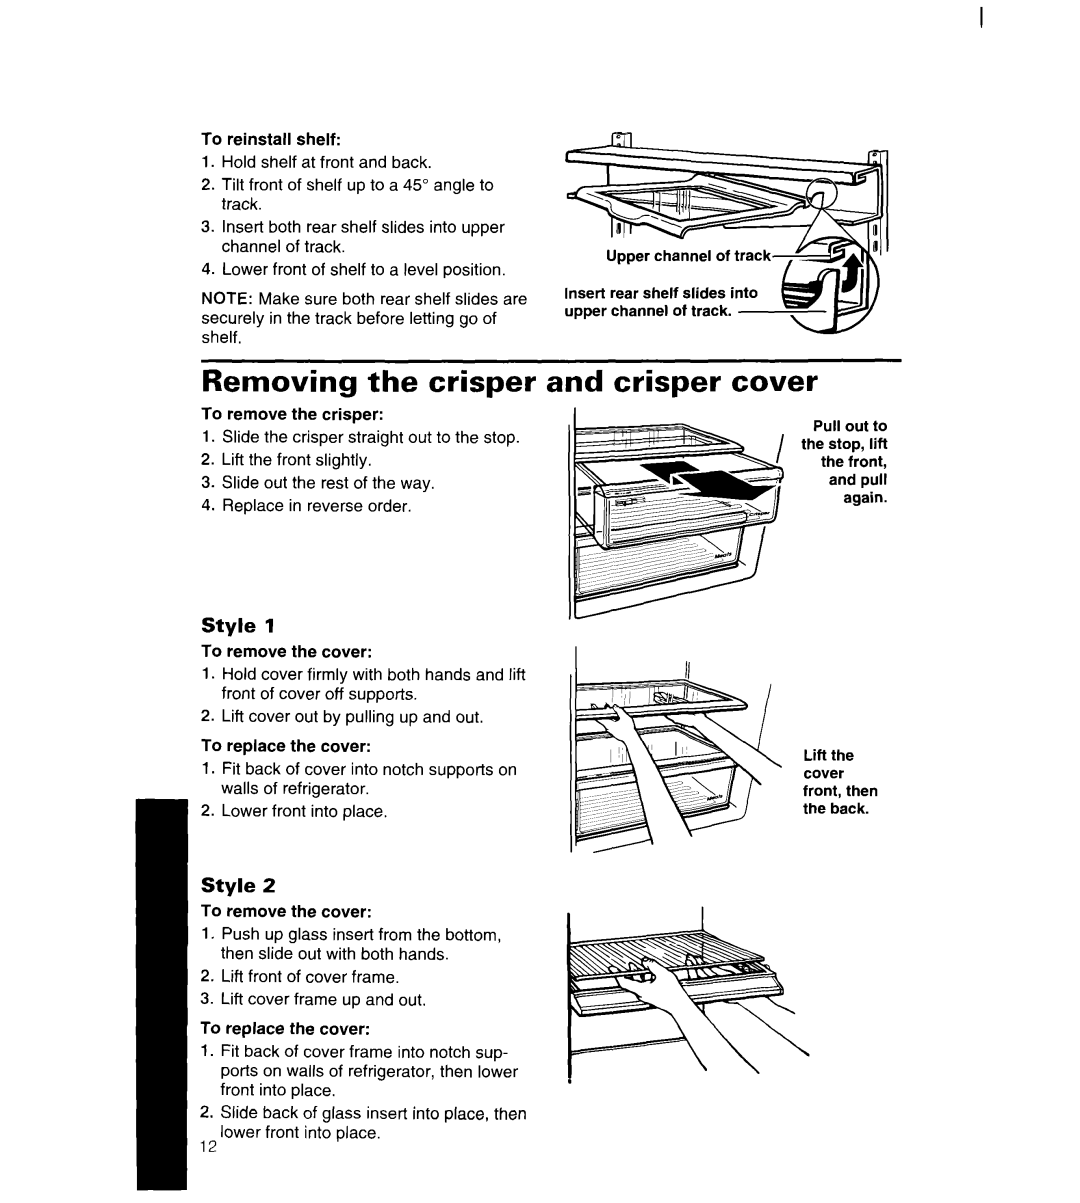 Whirlpool 4YED27DQDN00 manual Removing the crisper and crisper cover, Style 